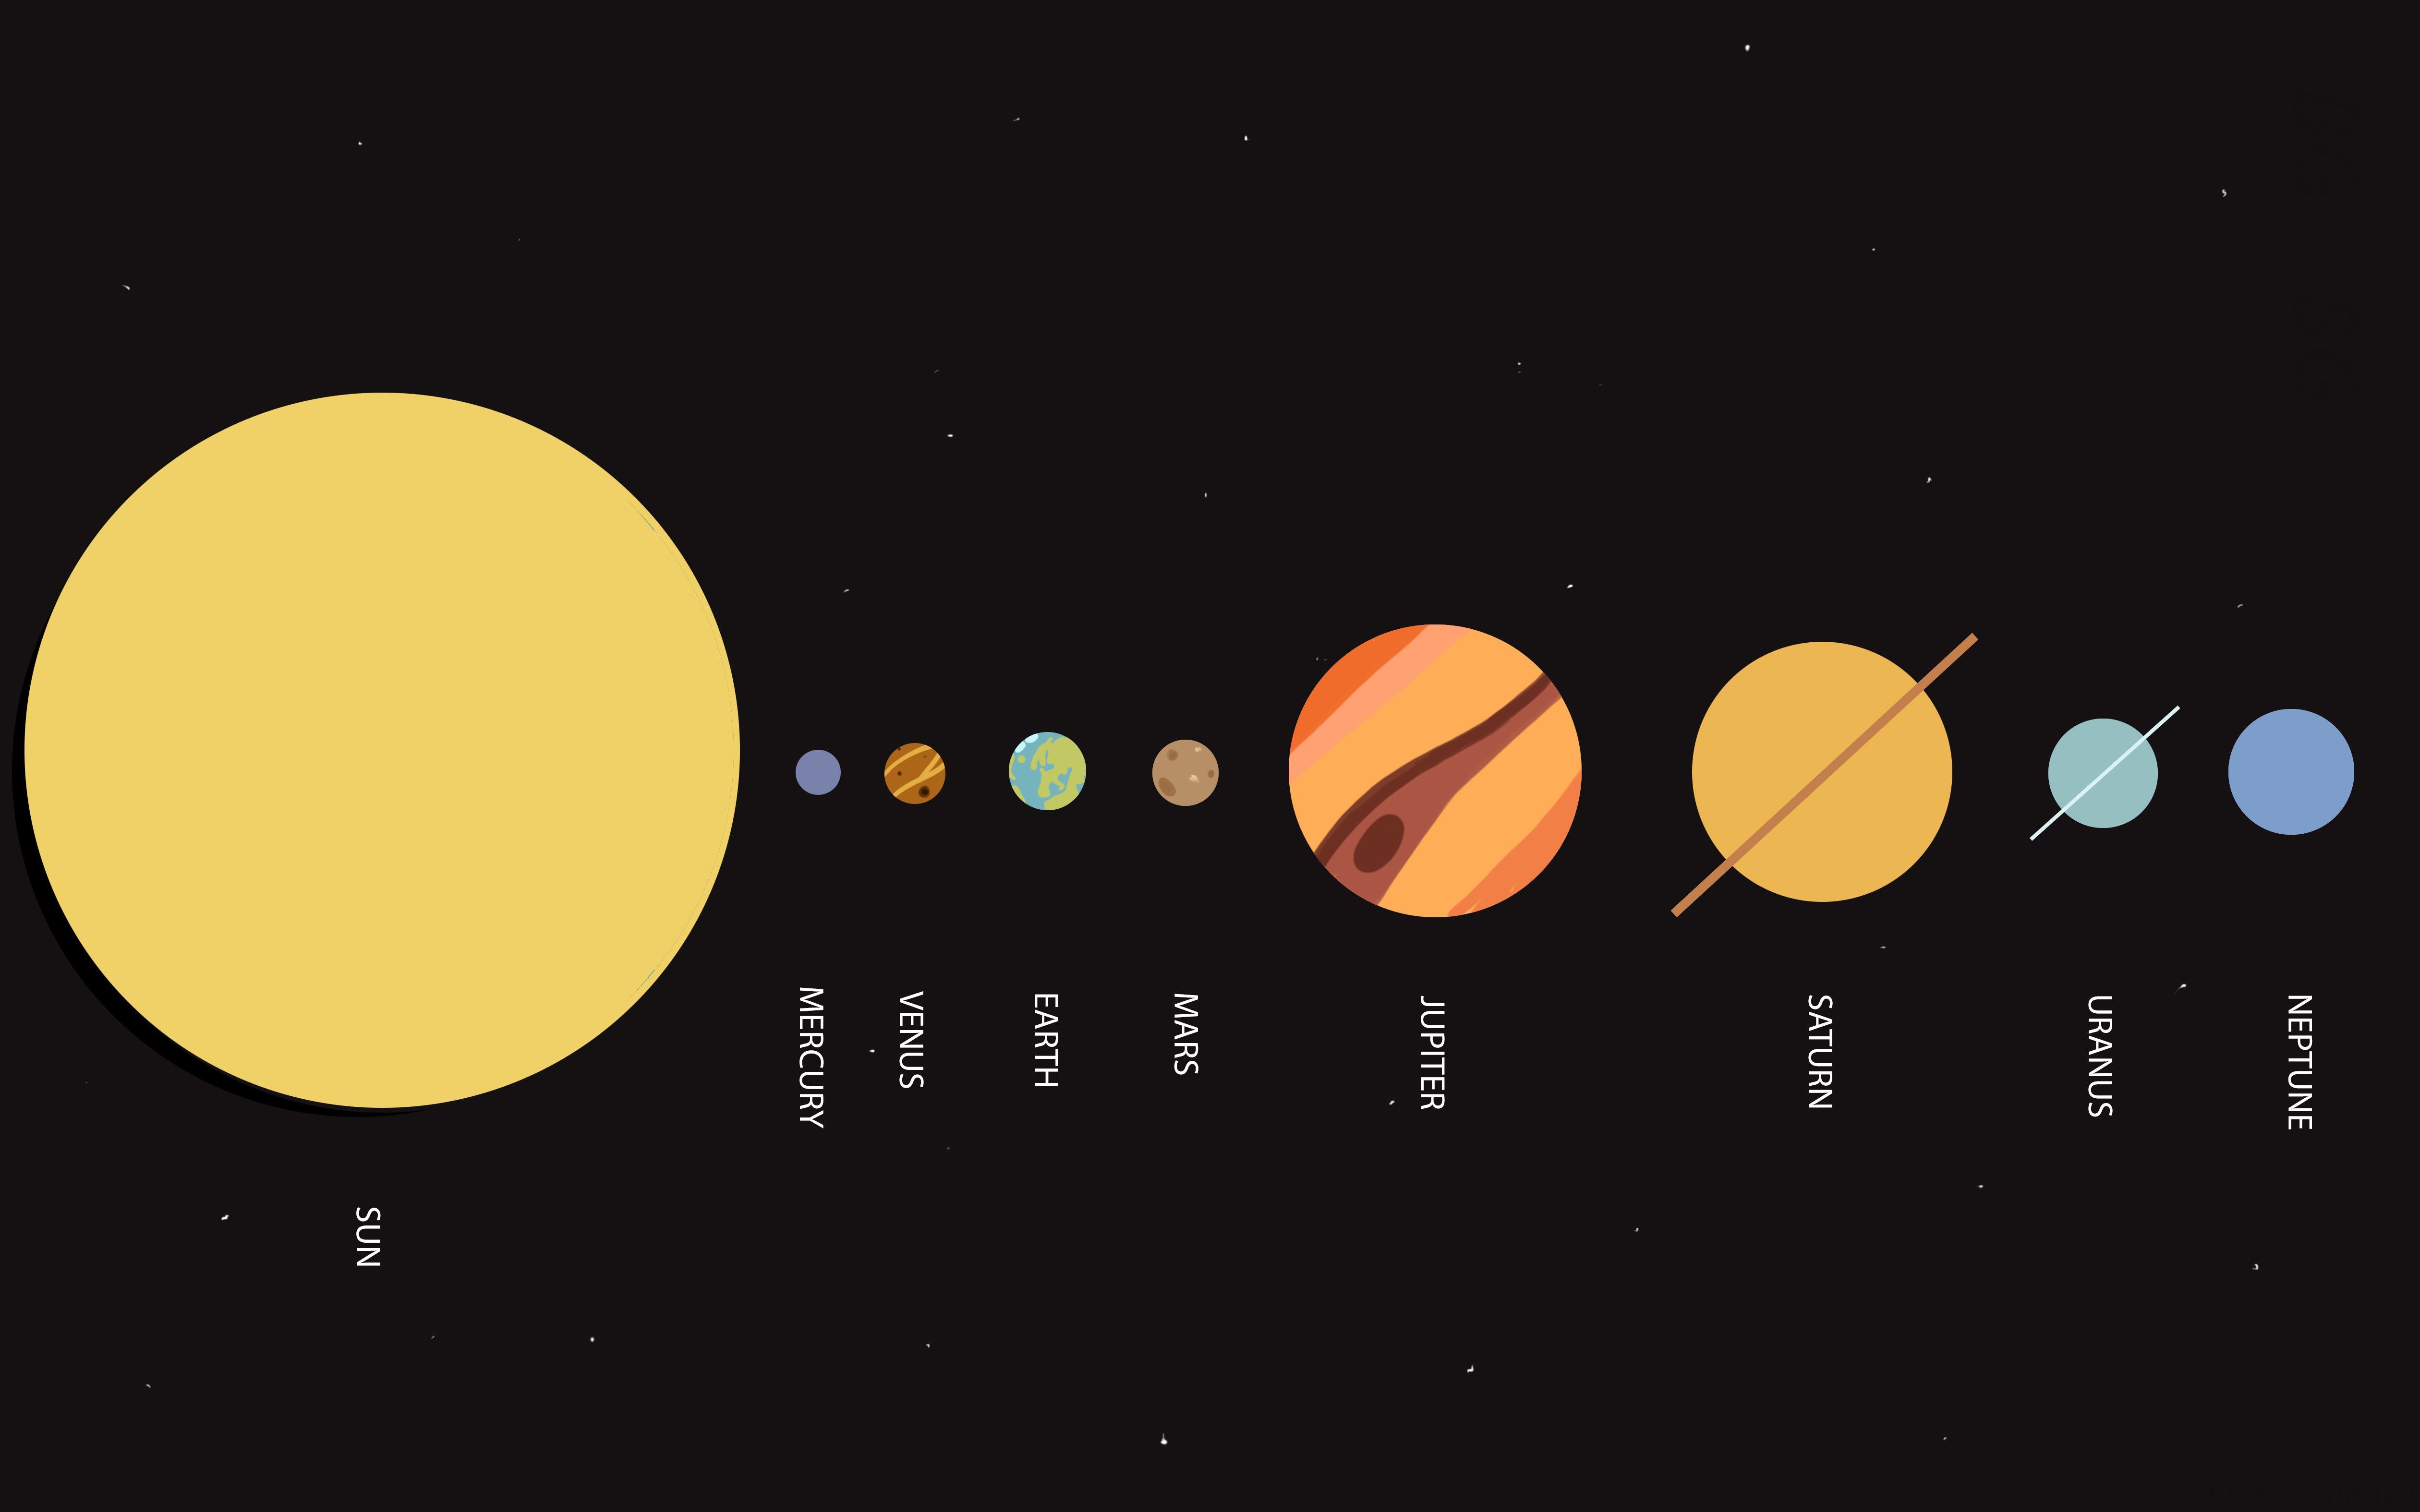 Tried my hand at making a minimalist style solar system wallpaper ...